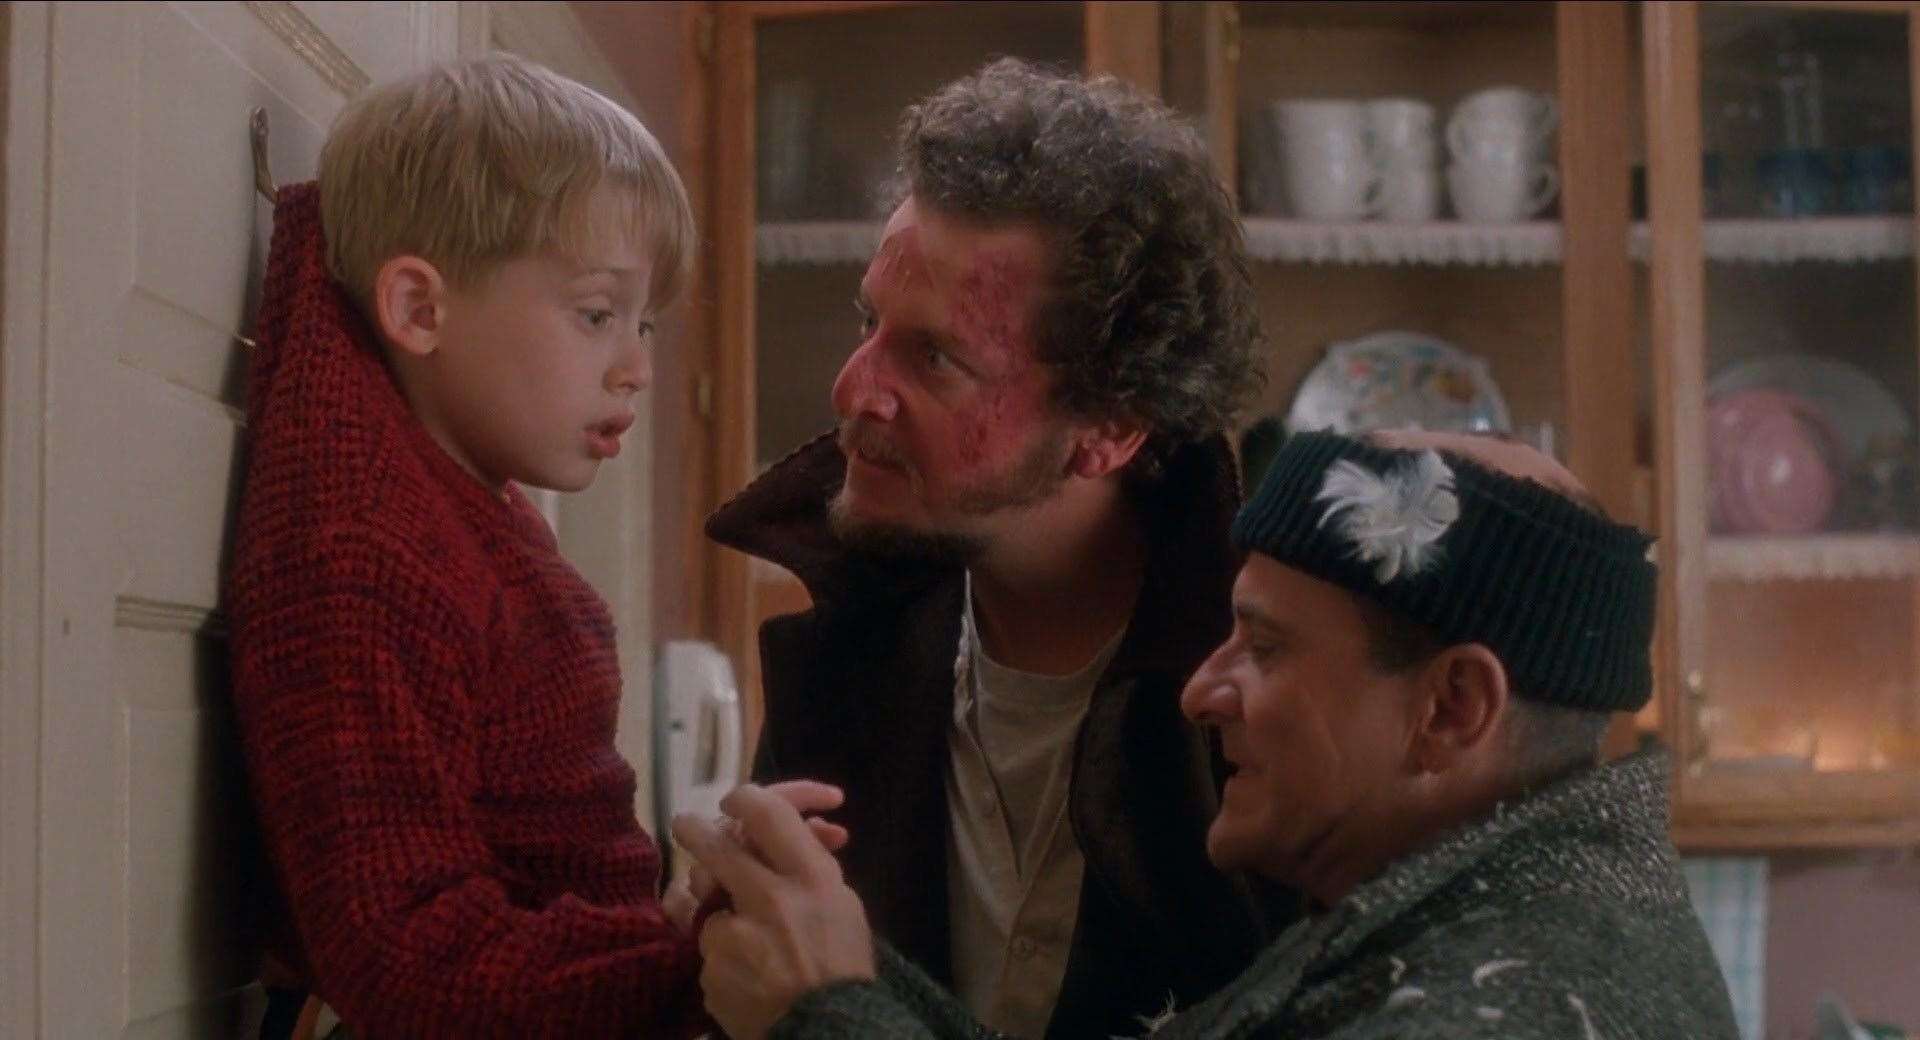 Macaulay Culkin stars in Home Alone, a Christmas classic being shown on the big screen at Dreamland